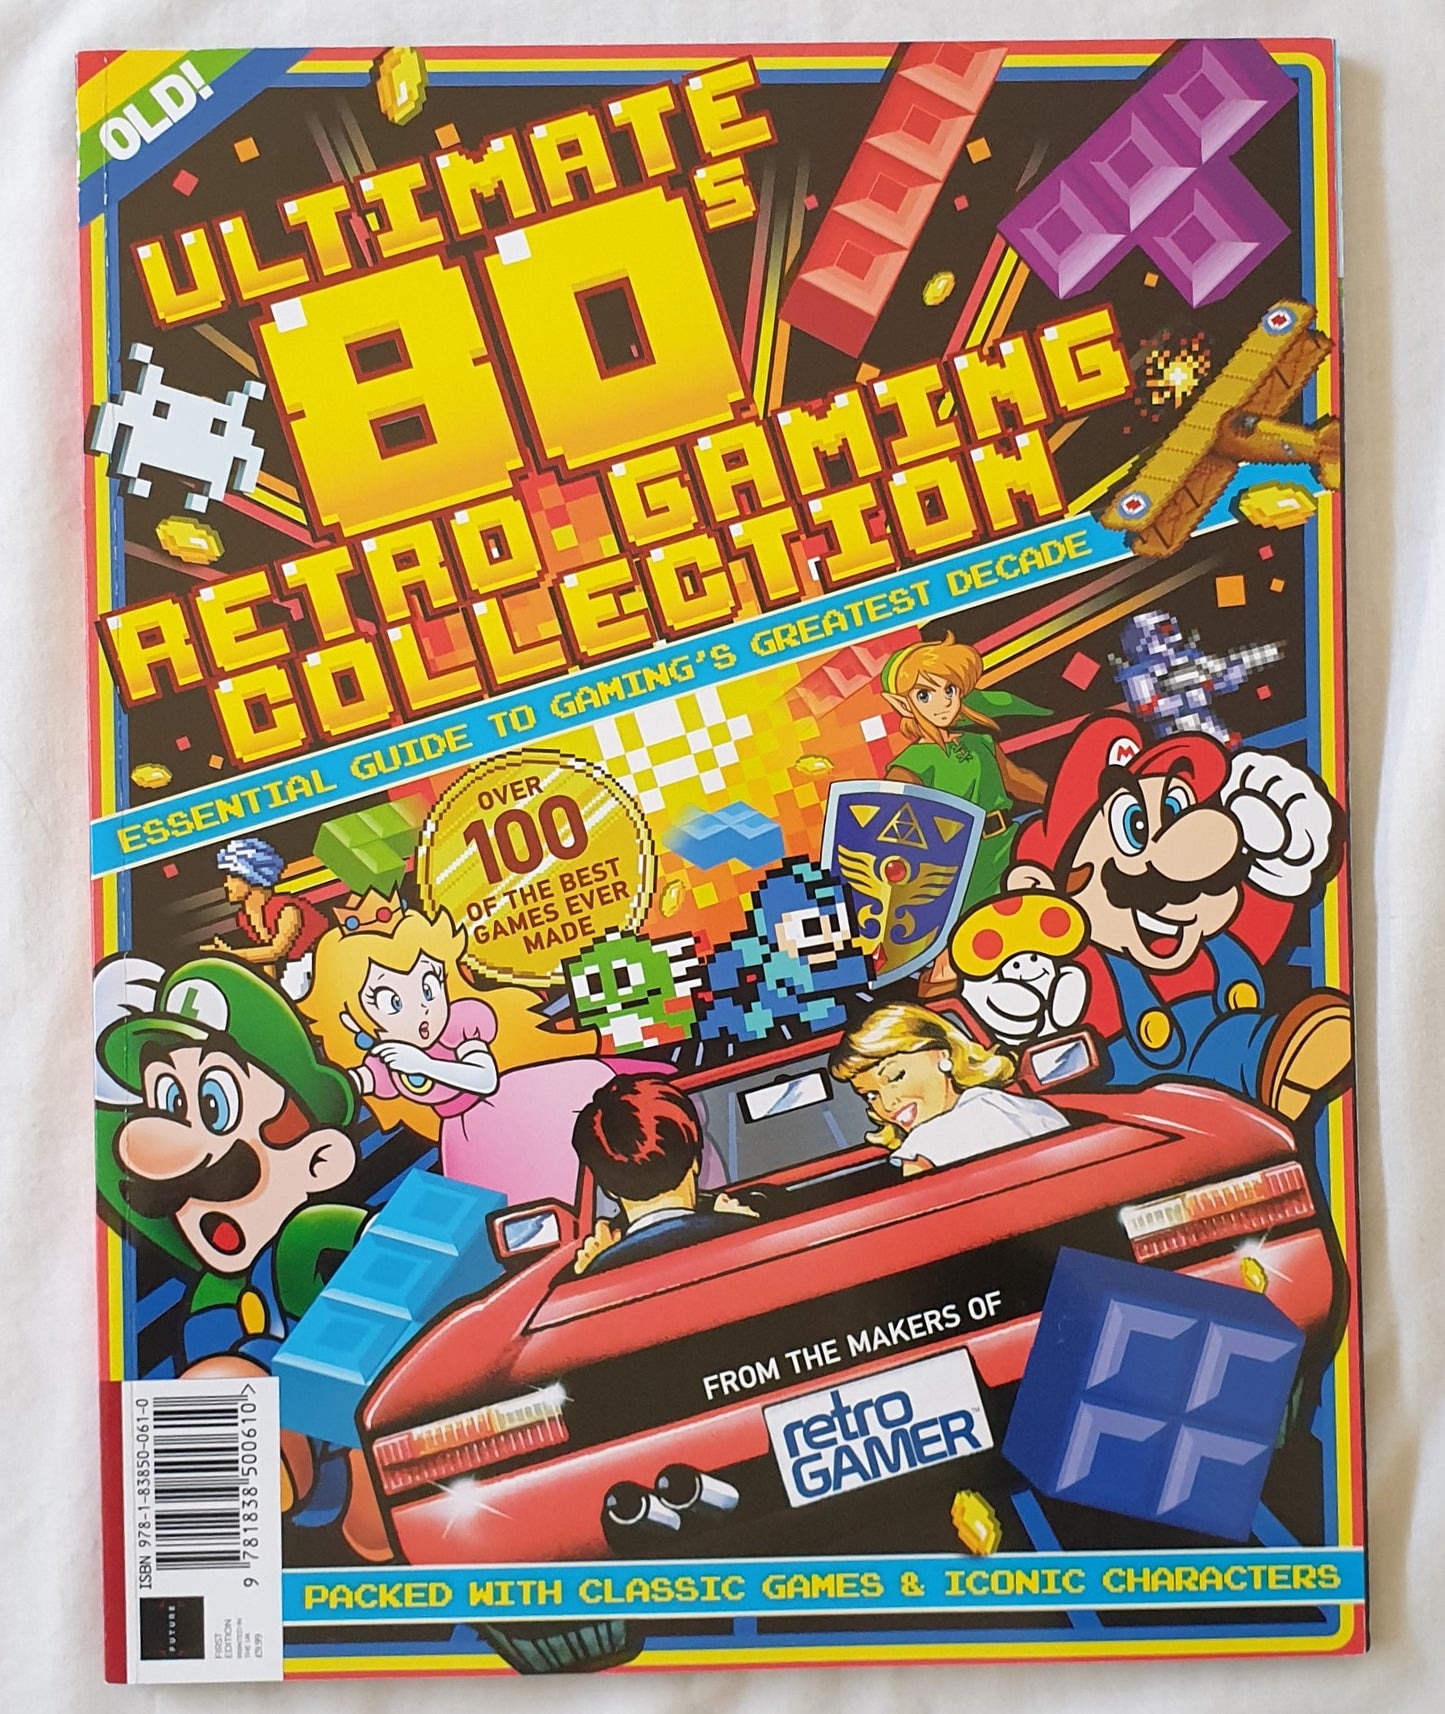 Ultimate 80s Retro Gaming Collection  Essential Guide to Gaming’s Greatest Decade  Retro Gamer Magazine